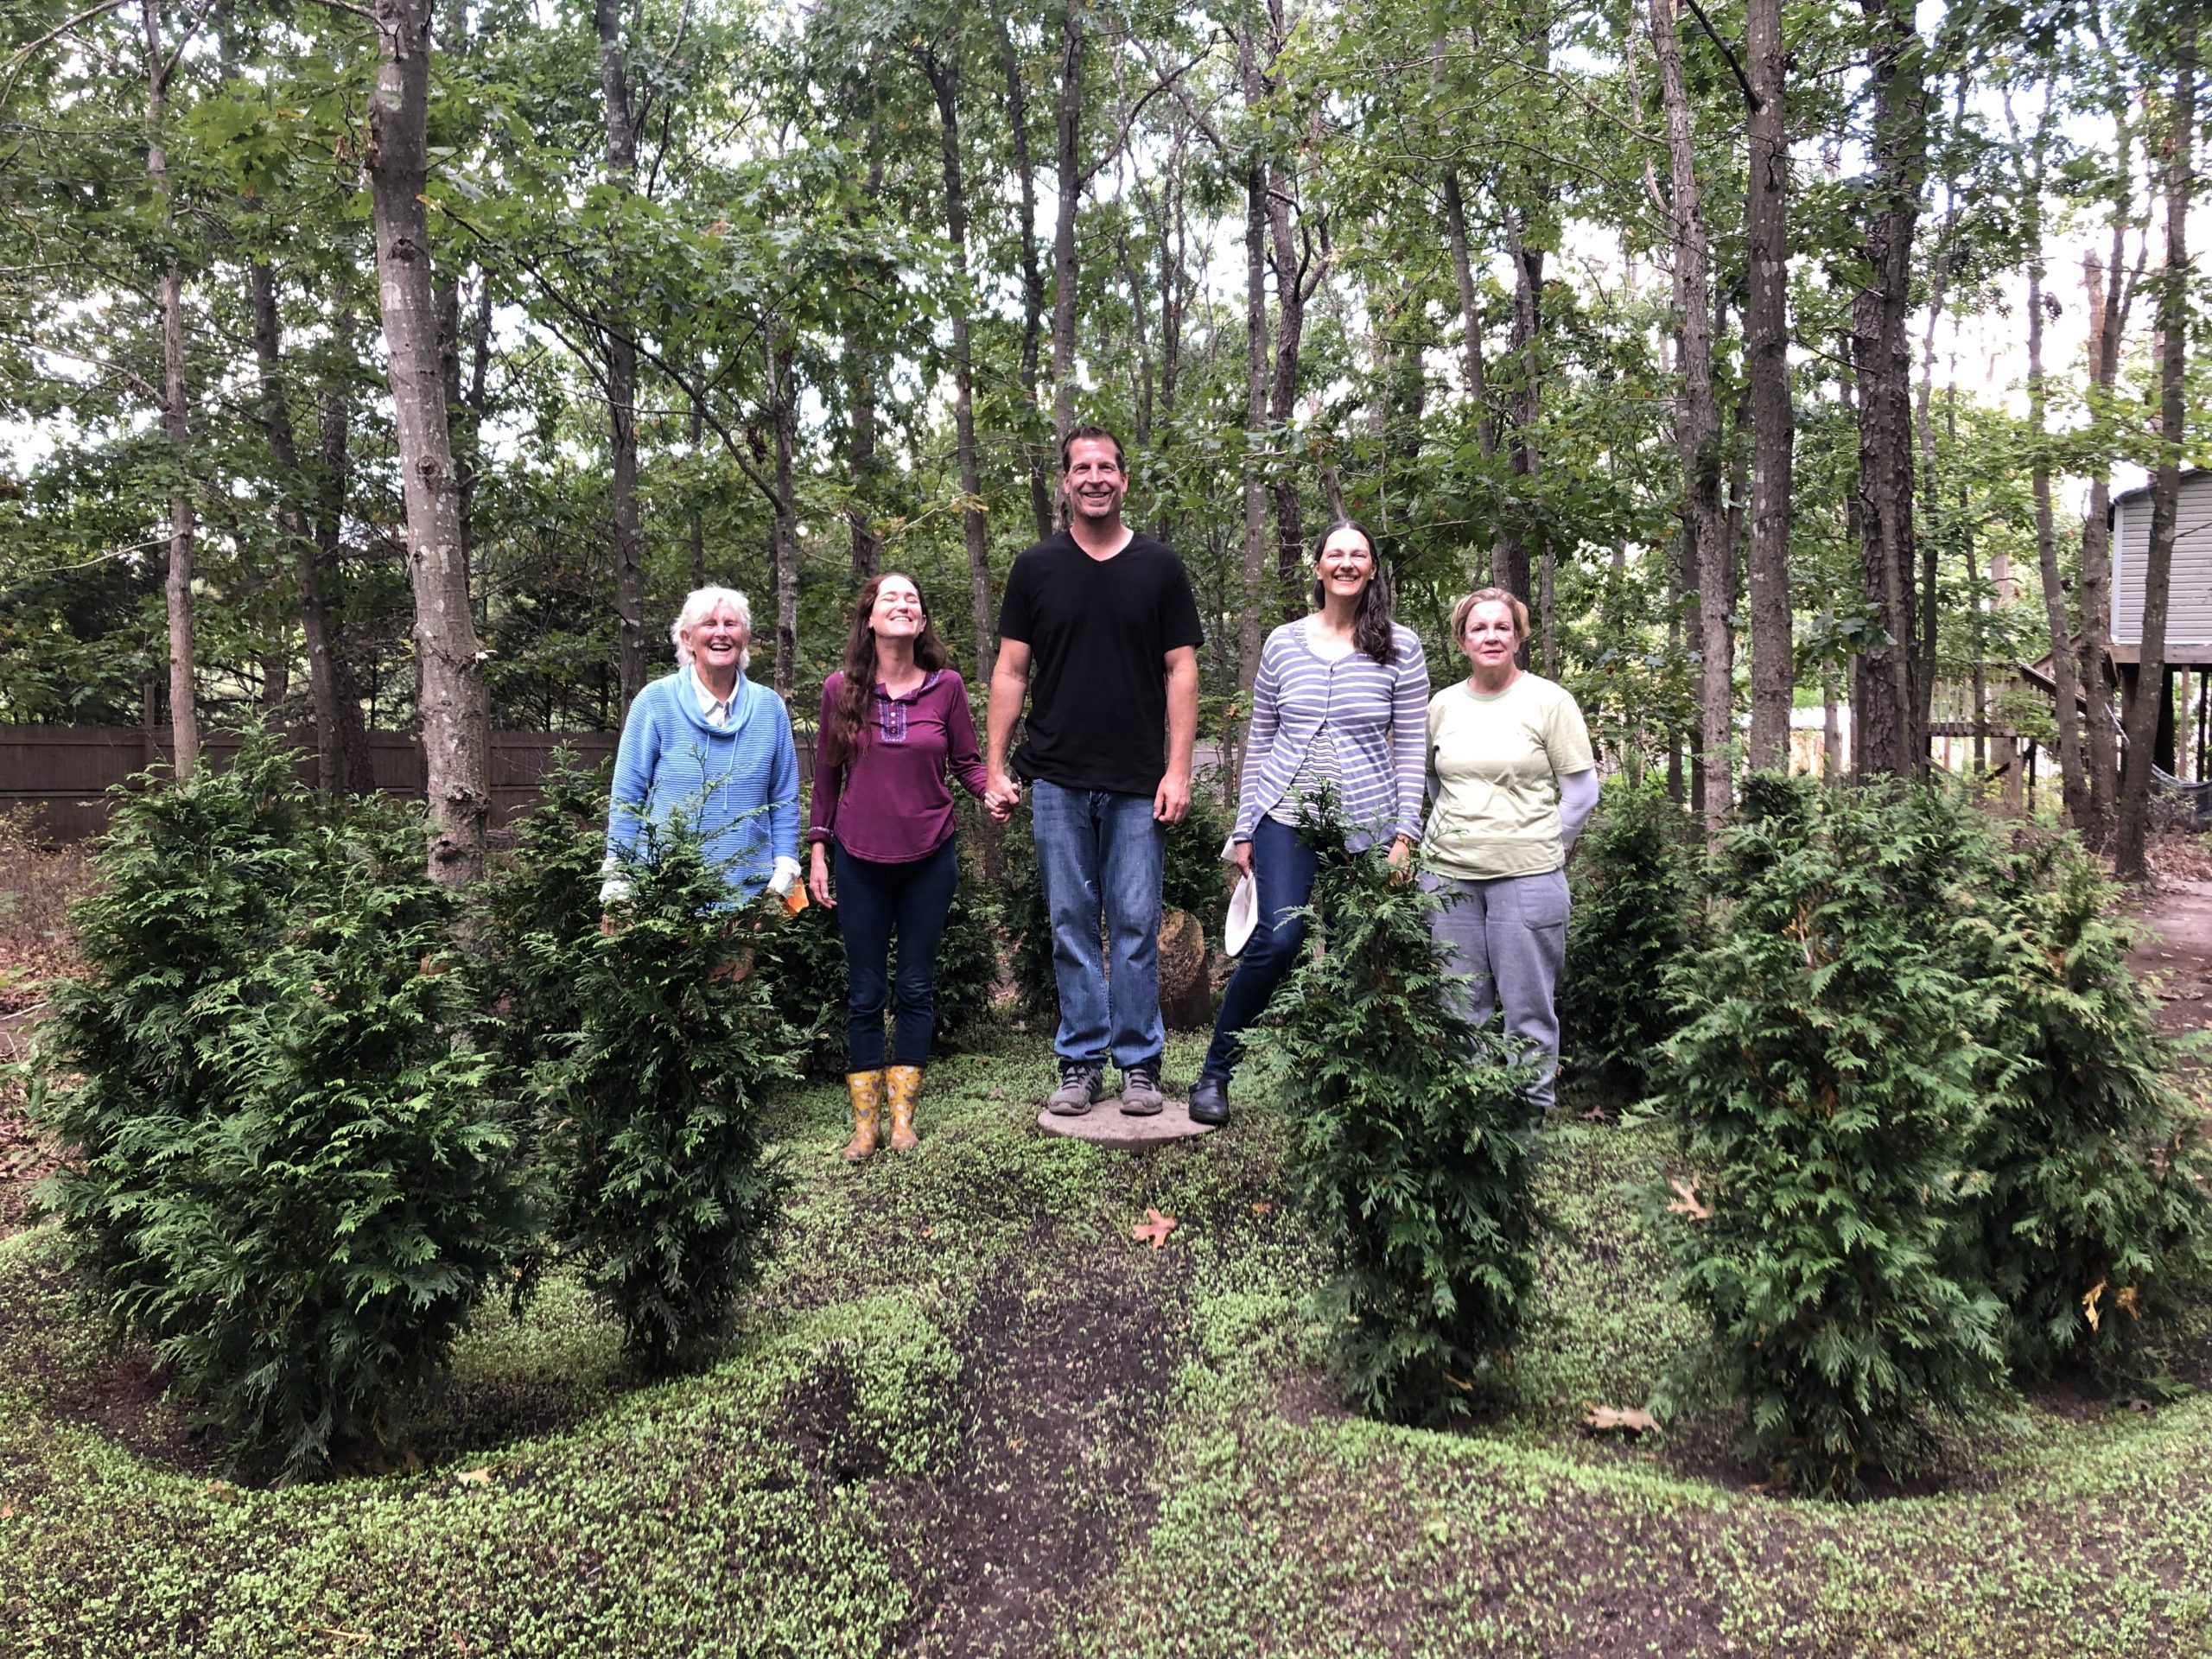 Some September CREW members took a field trip to the home of Susan Blacklocke and Soullas Sofar, where everything about the property is focused on protecting the planet, from beehives to water purifying Koi fish ponds. From left, Darr Reilly, Susan Blacklocke, Soullas Sofar, Ellen Greaves and Barbara Ham.